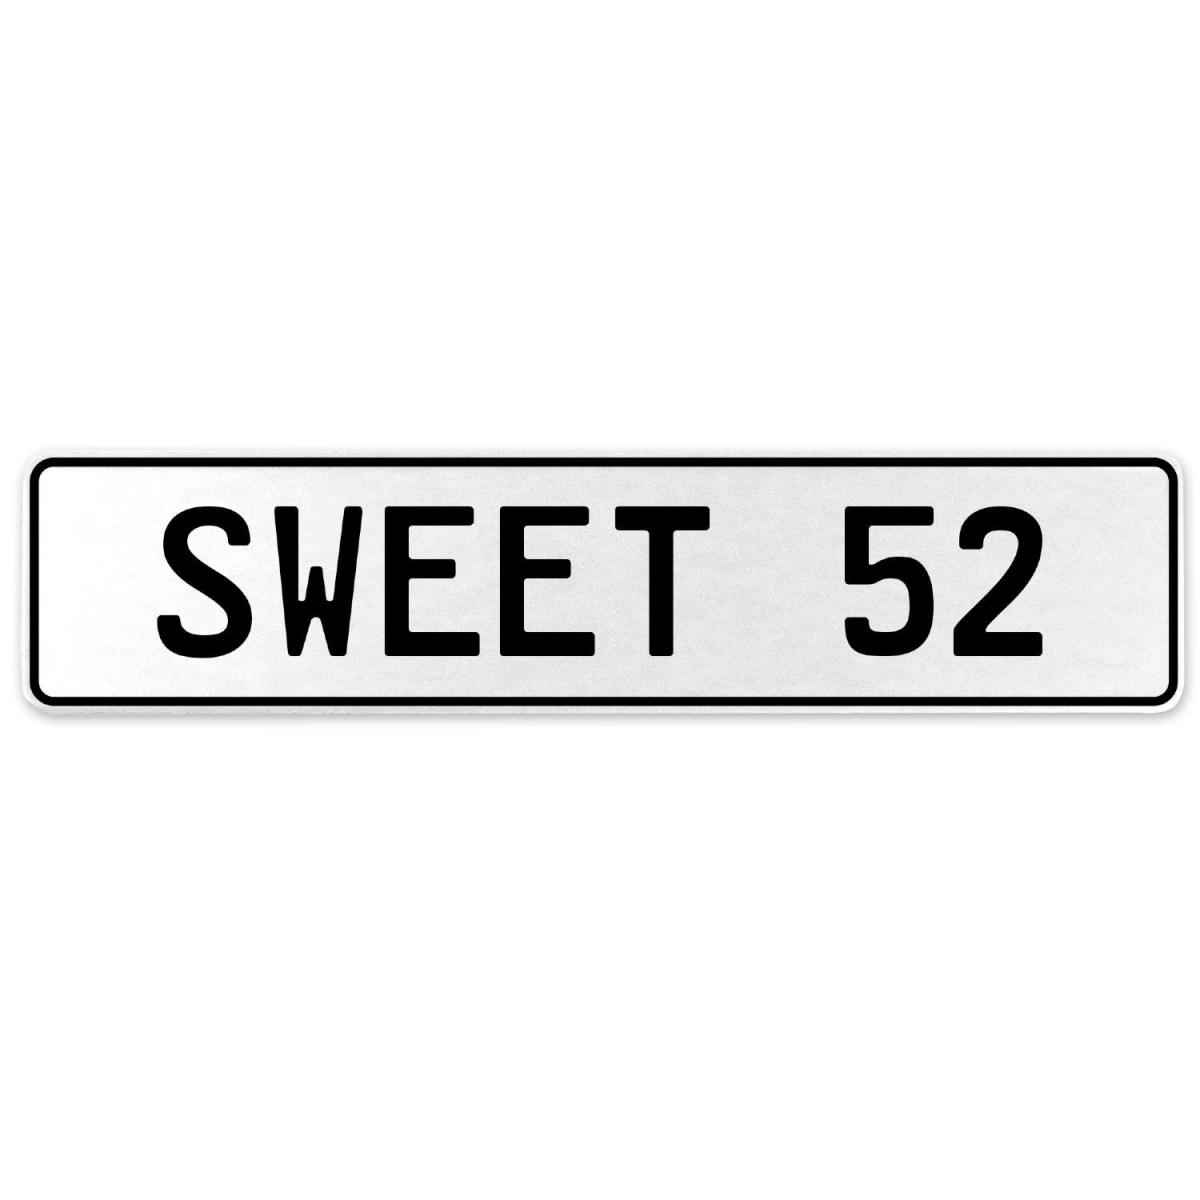 554154 Sweet 52 - White Aluminum Street Sign Mancave Euro Plate Name Door Sign Wall